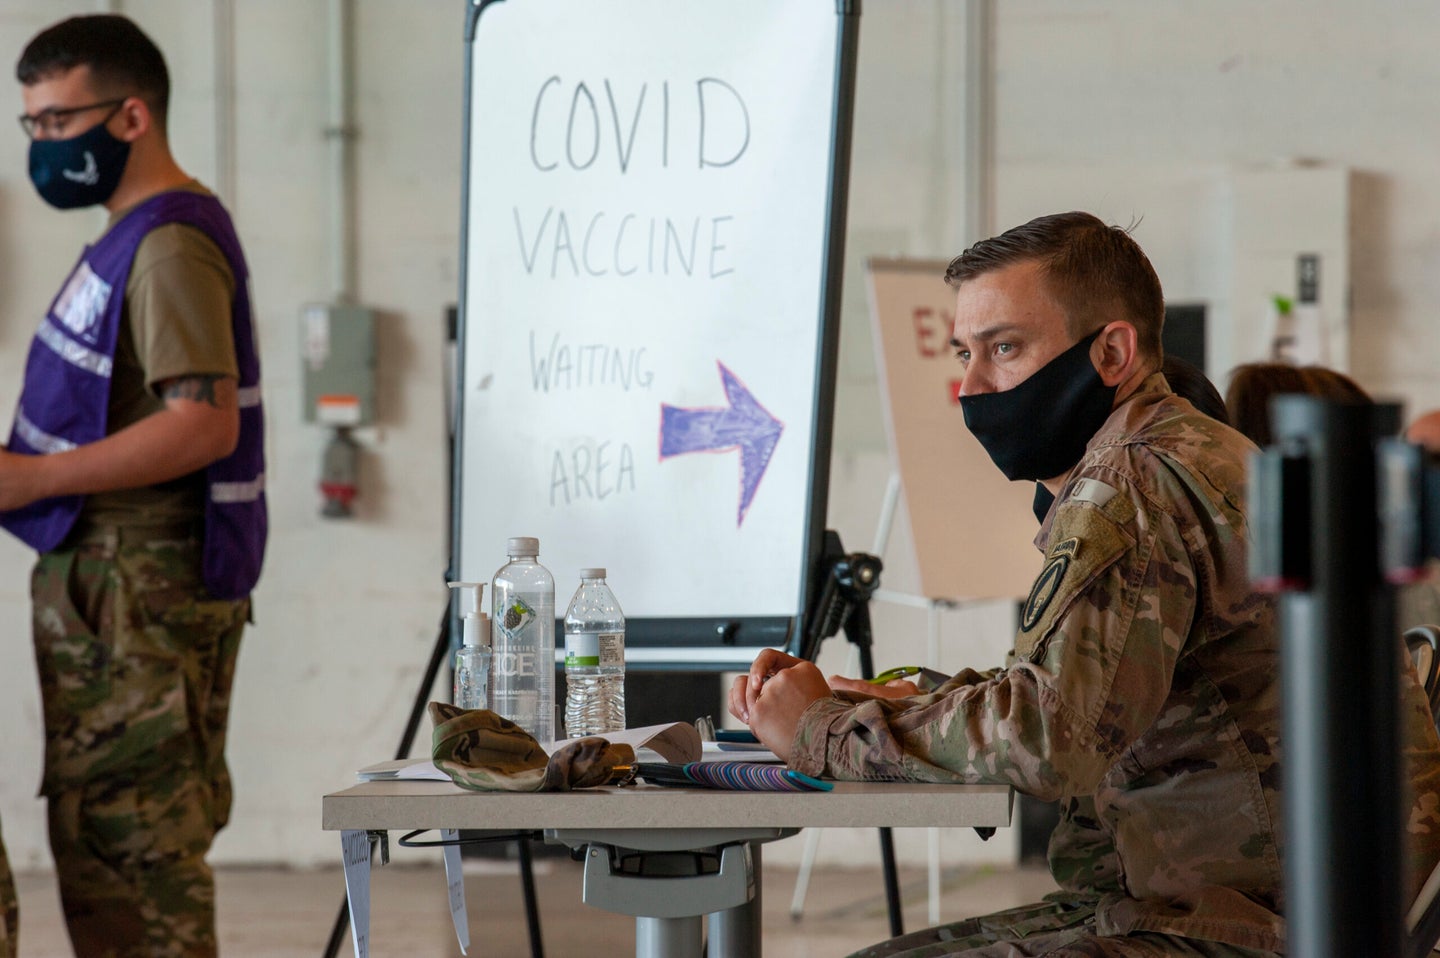 U.S. Army Master Sgt. James E. Loftus, U.S. Special Operations Command Joint Intelligence Center senior enlisted advisor, sits at a checkpoint table at a COVID-19 vaccination distribution site, located on MacDill Air Force Base, Fla., March 12, 2021. Each patient is cross-referenced from a preorganized list to ensure all members are accounted for and that all listed personnel obtain the vaccine. (U.S. Air Force photo by Airman 1st Class David D. McLoney)